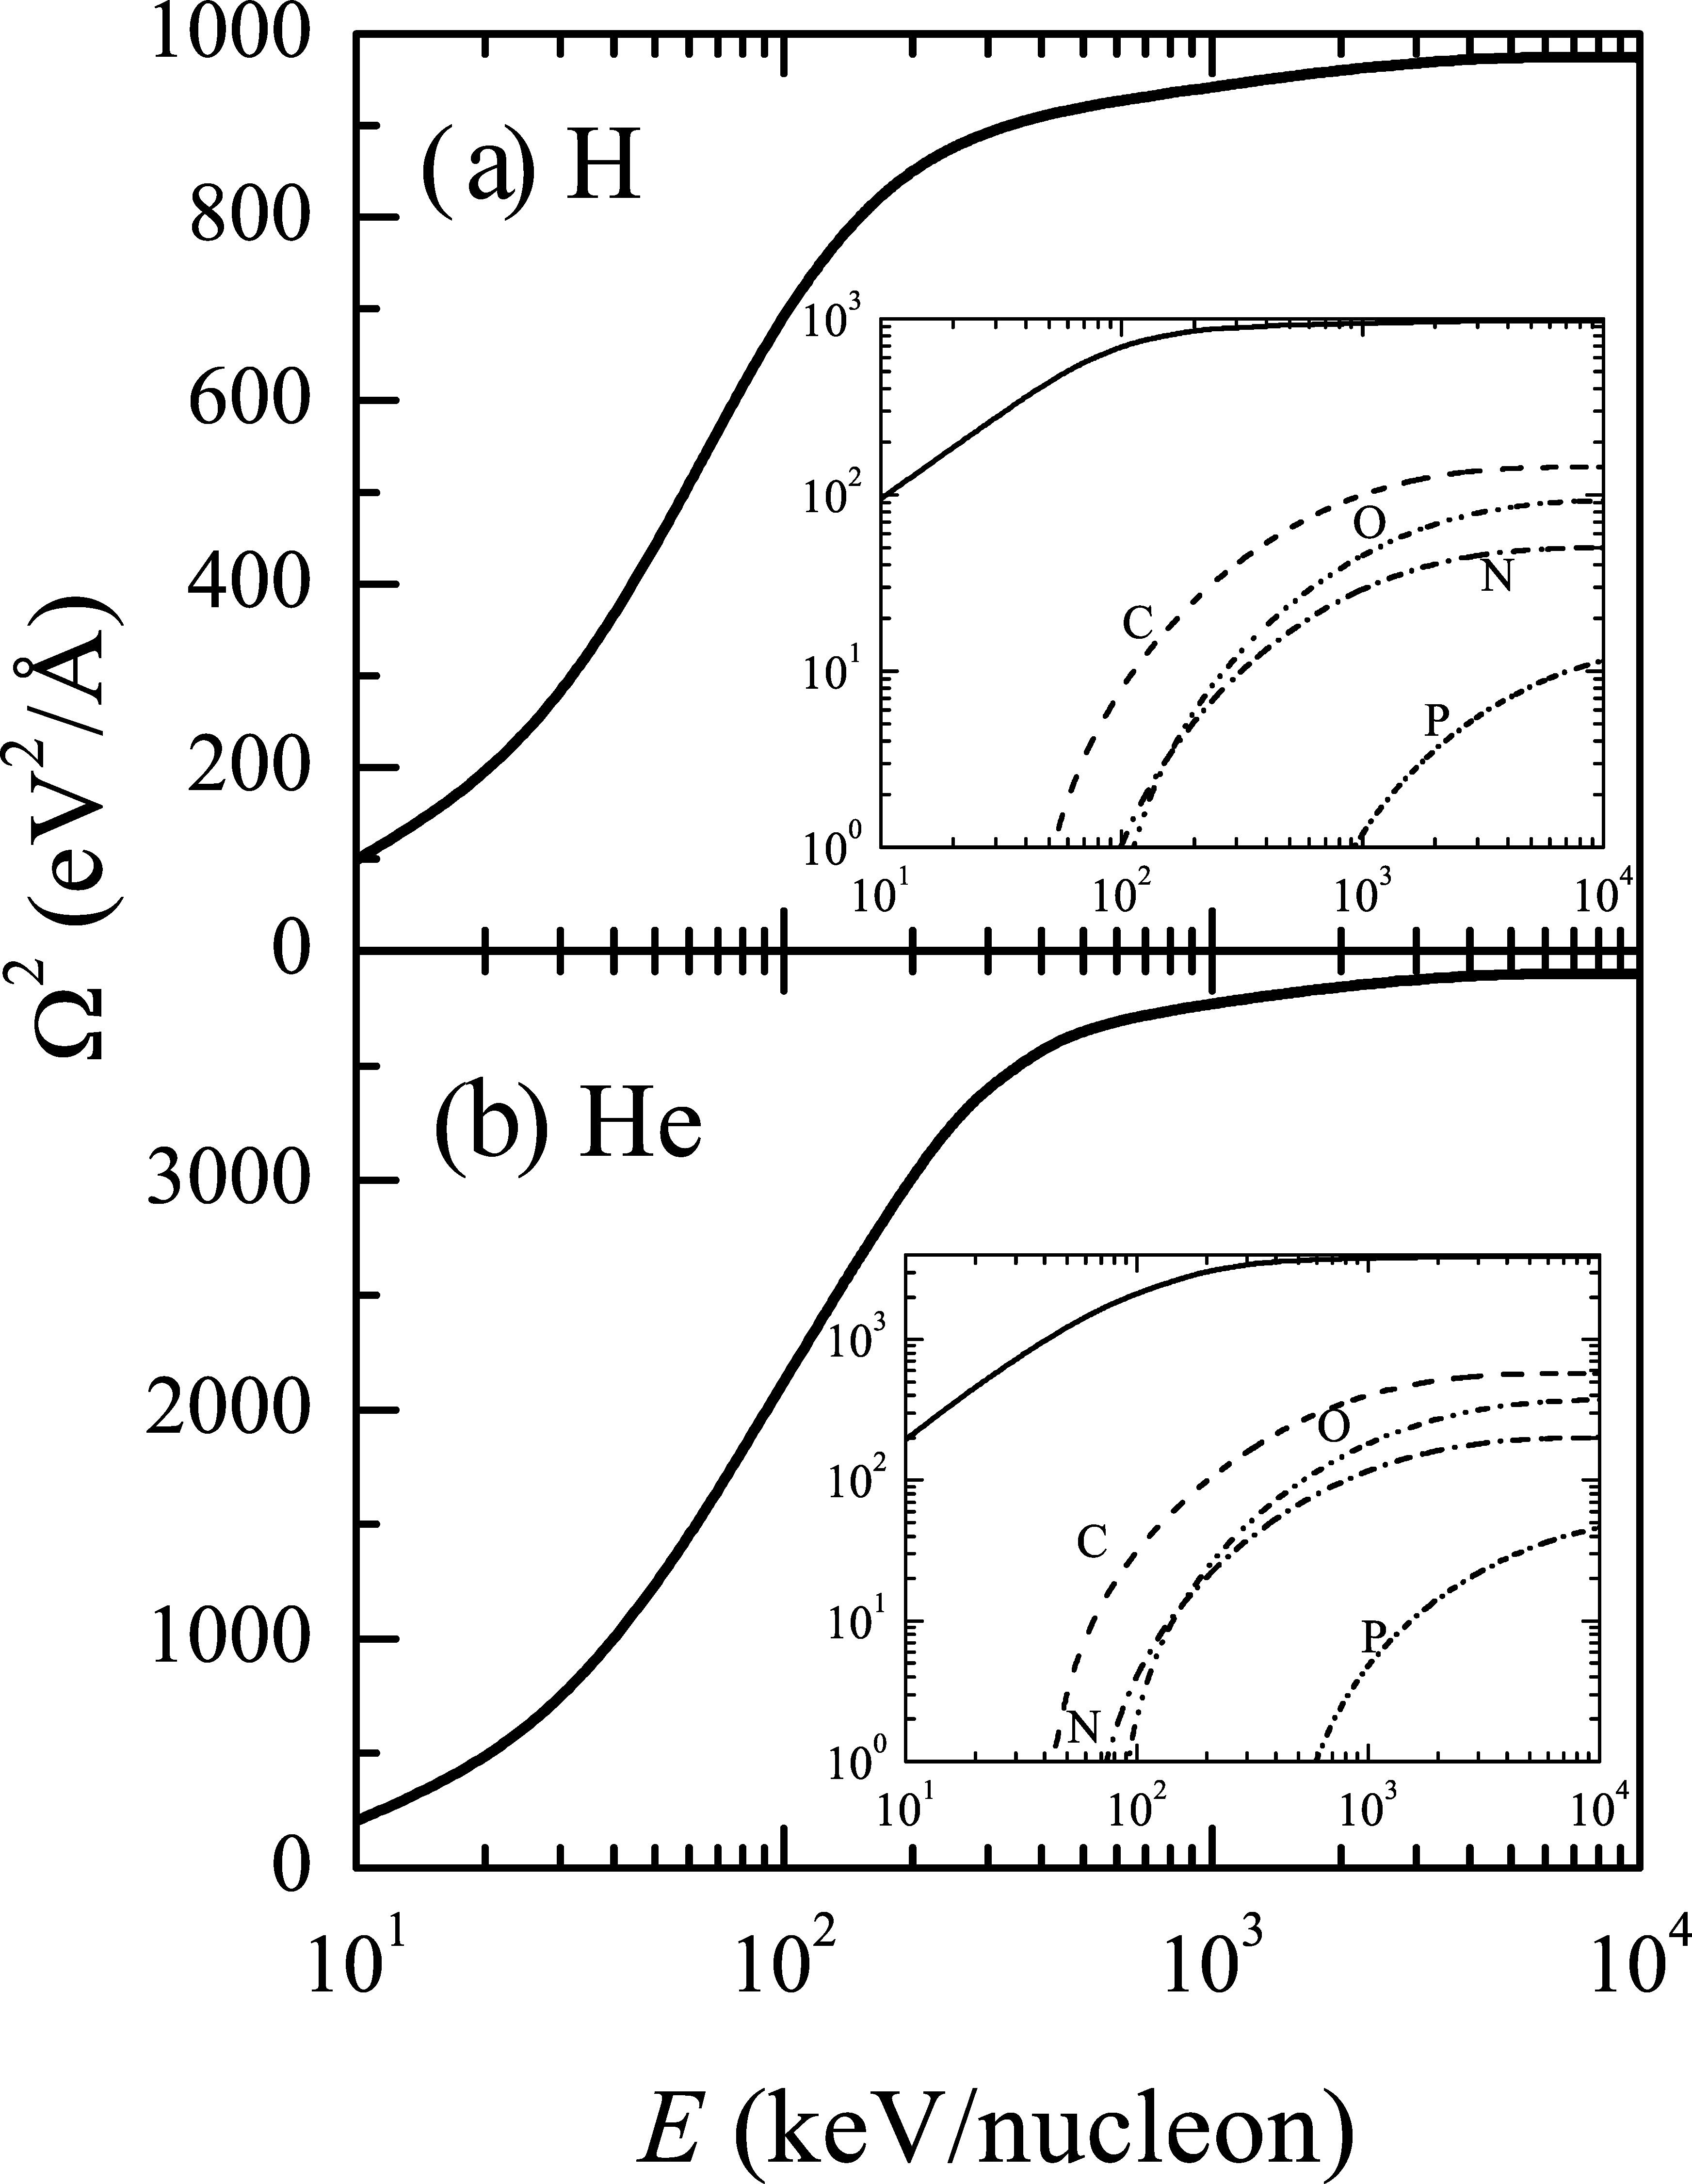 Energy Loss Of Hydrogen And Helium Ion Beams In Dna Calculations Based On A Realistic Energy Loss Function Of The Target